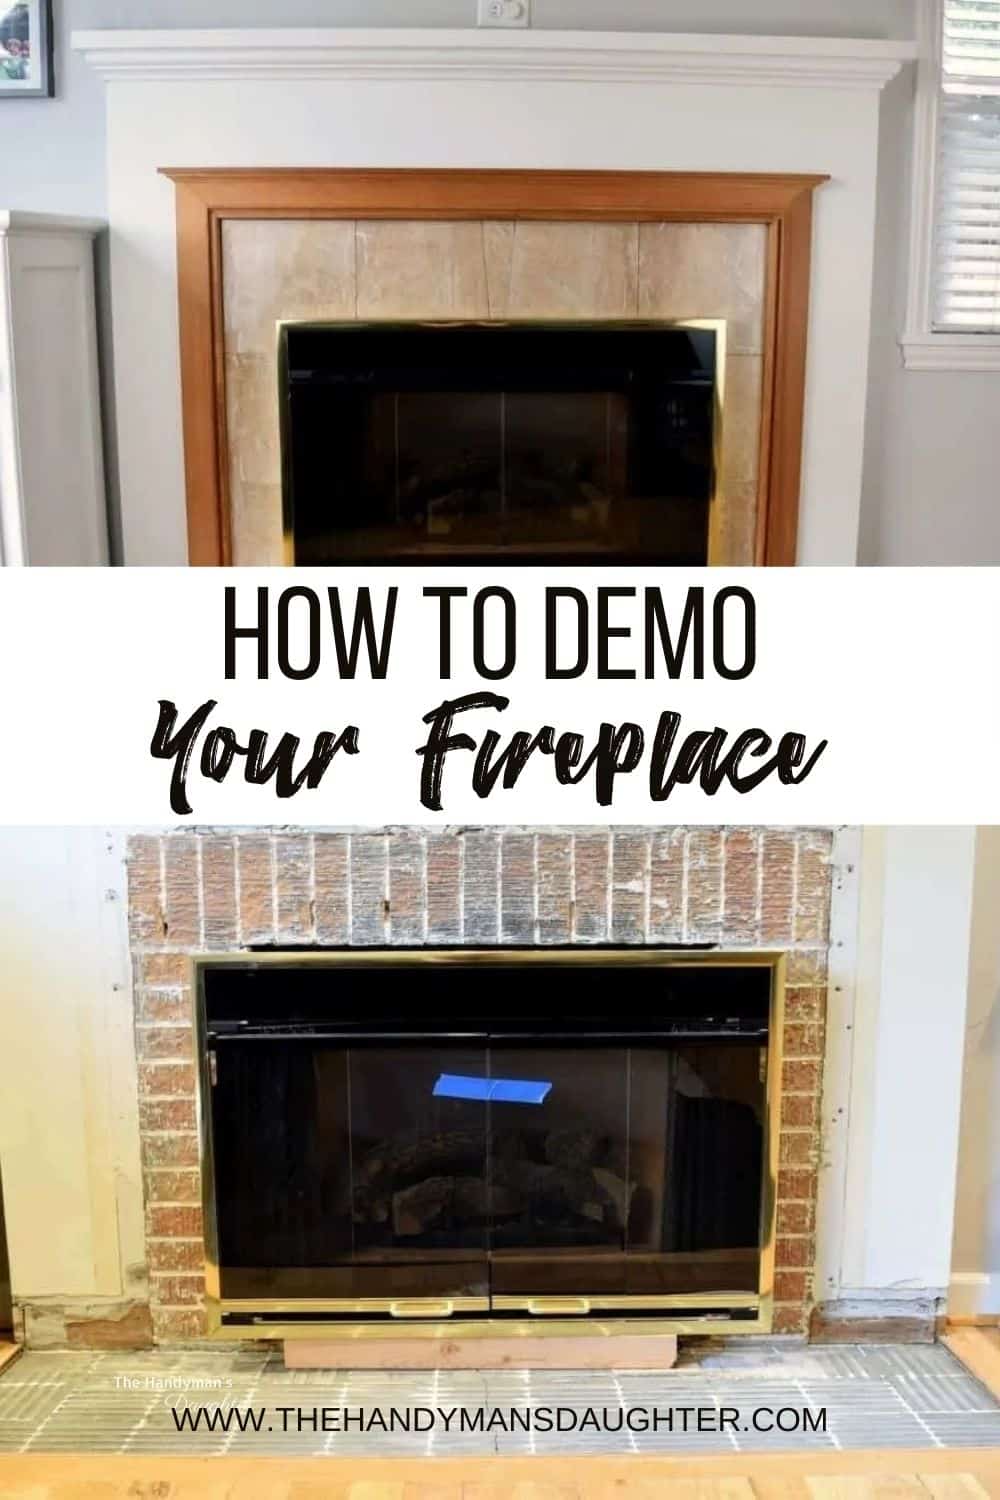 before and after image of fireplace demo with text overlay